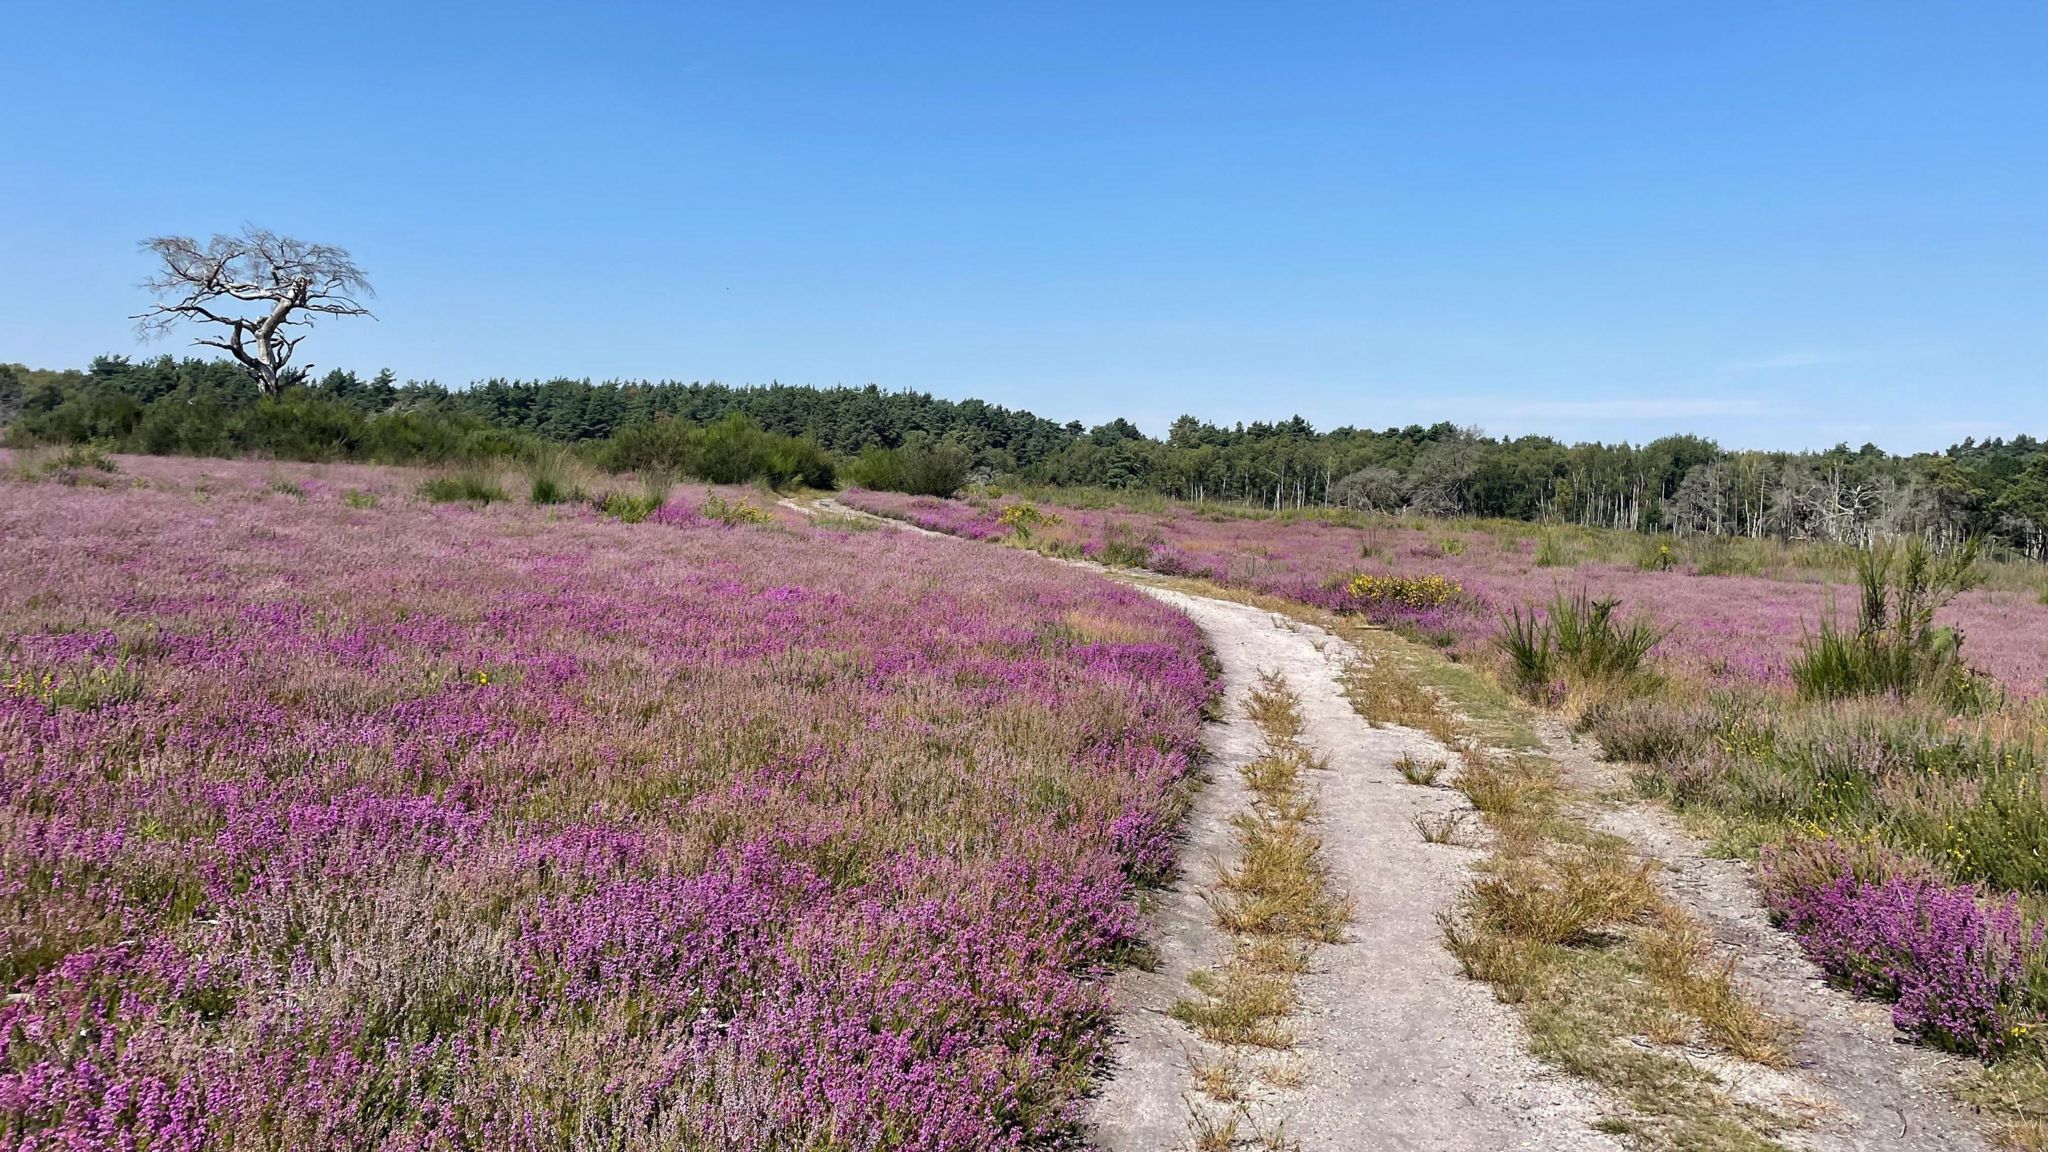 A track breaks up heathland, which is covered in purple flowers. In the distance there are green trees.